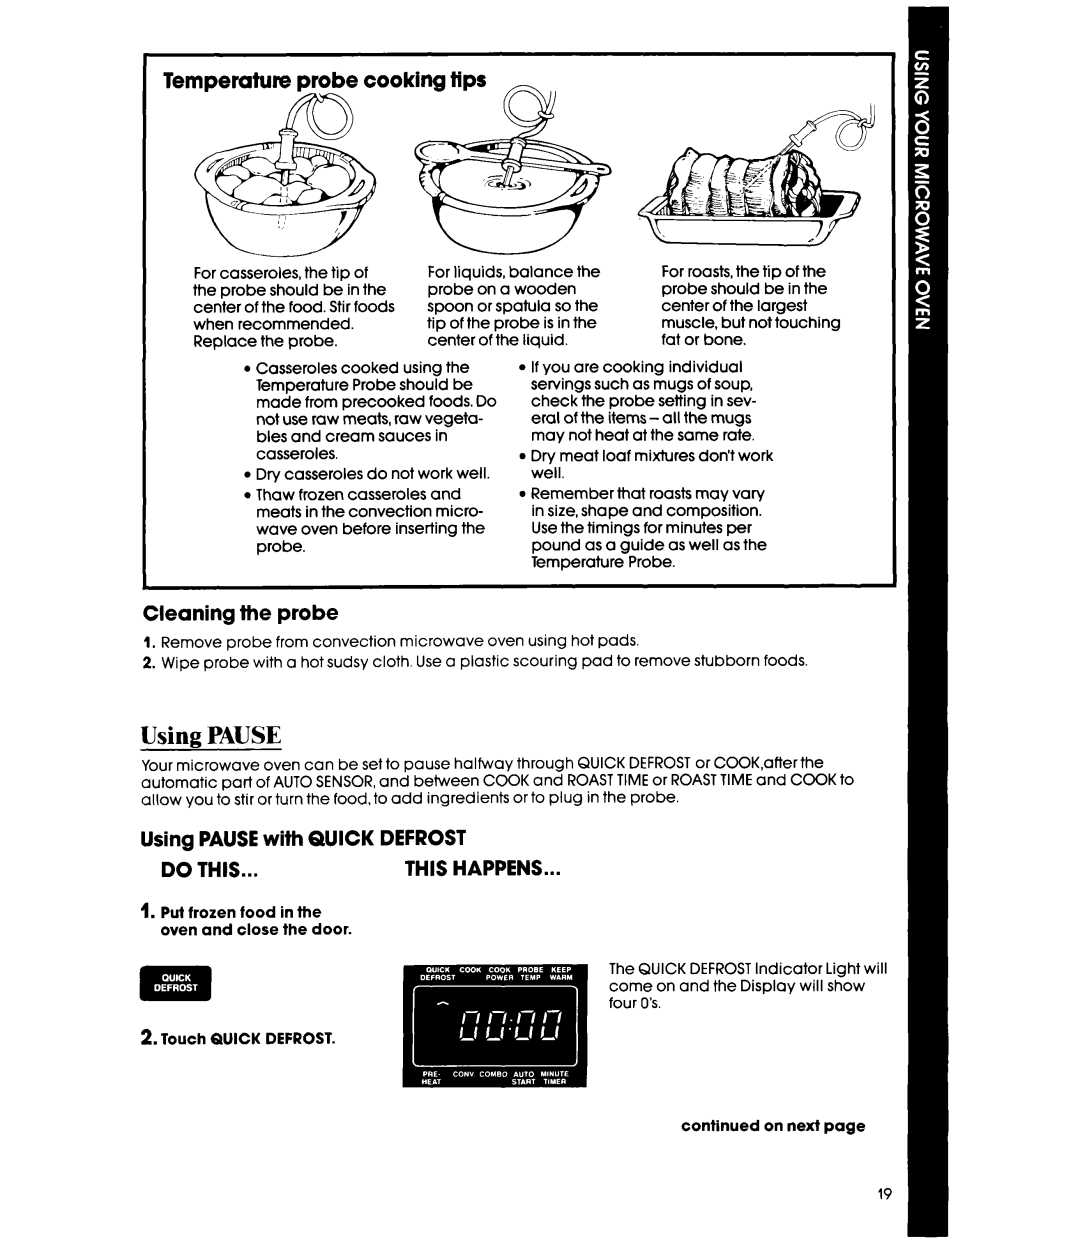 Whirlpool MC8990XT manual Temperature probe cooking tips, Cleaning the probe, Using PAUSE with QUICK DEFROST, Do This 